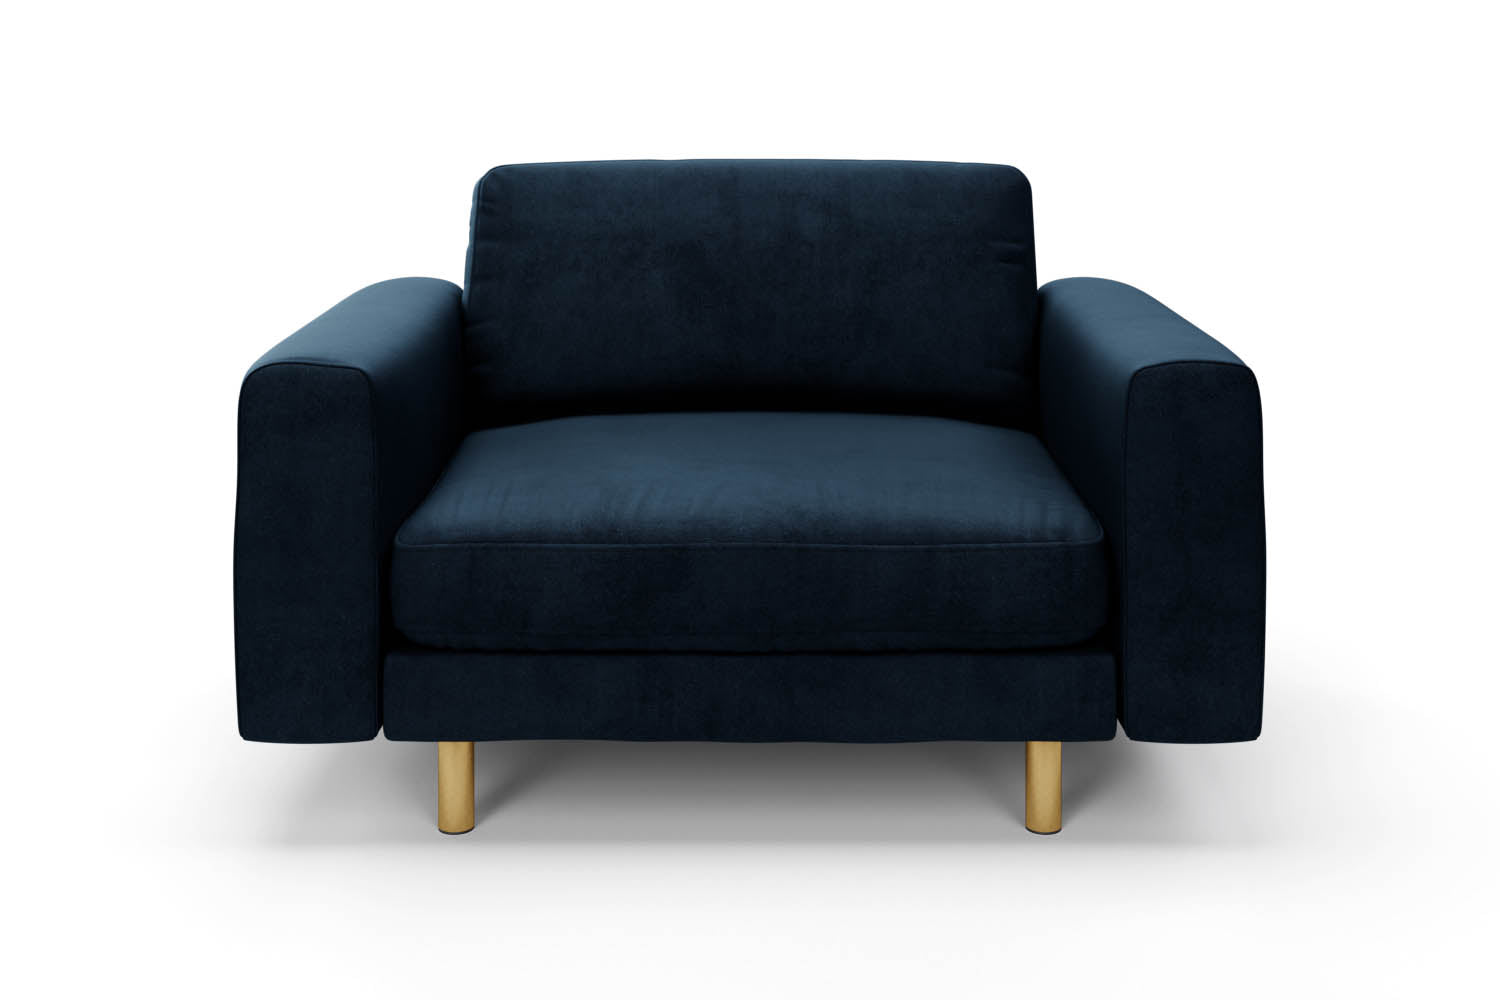 SNUG | The Big Chill 1.5 Seater Snuggler in Deep Blue variant_40837172953136